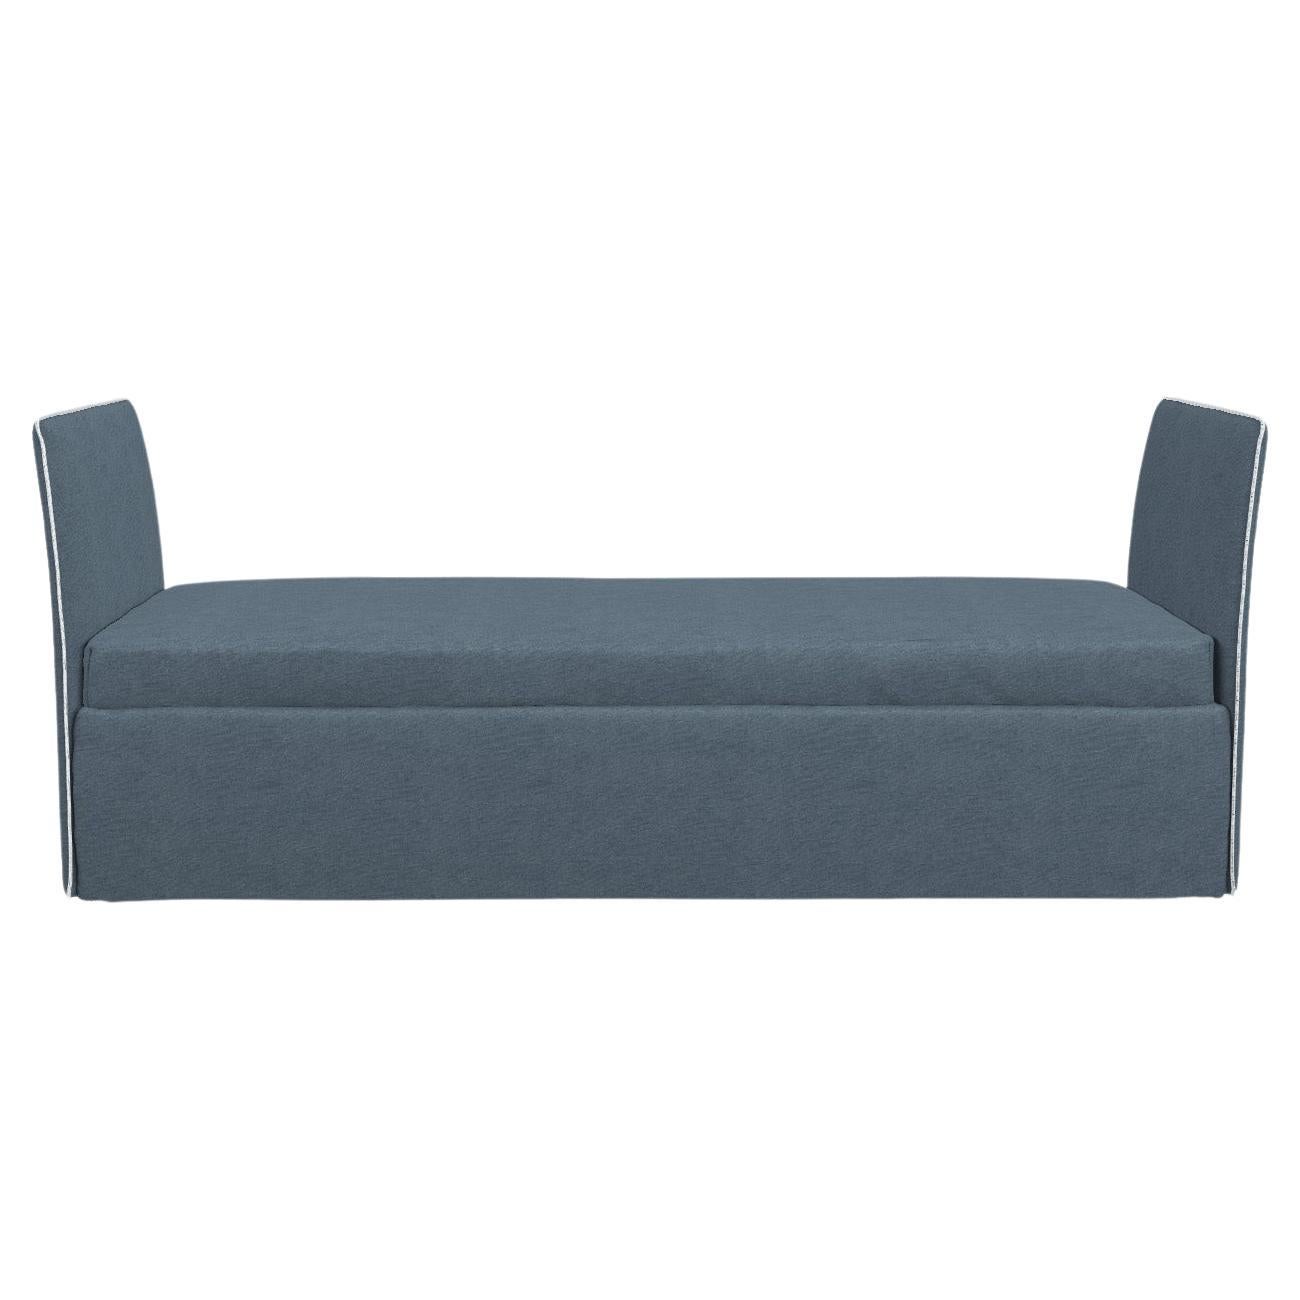 Gervasoni Open 2 Small Modular Bed Sofa in Munch Upholstery by Paola Navone